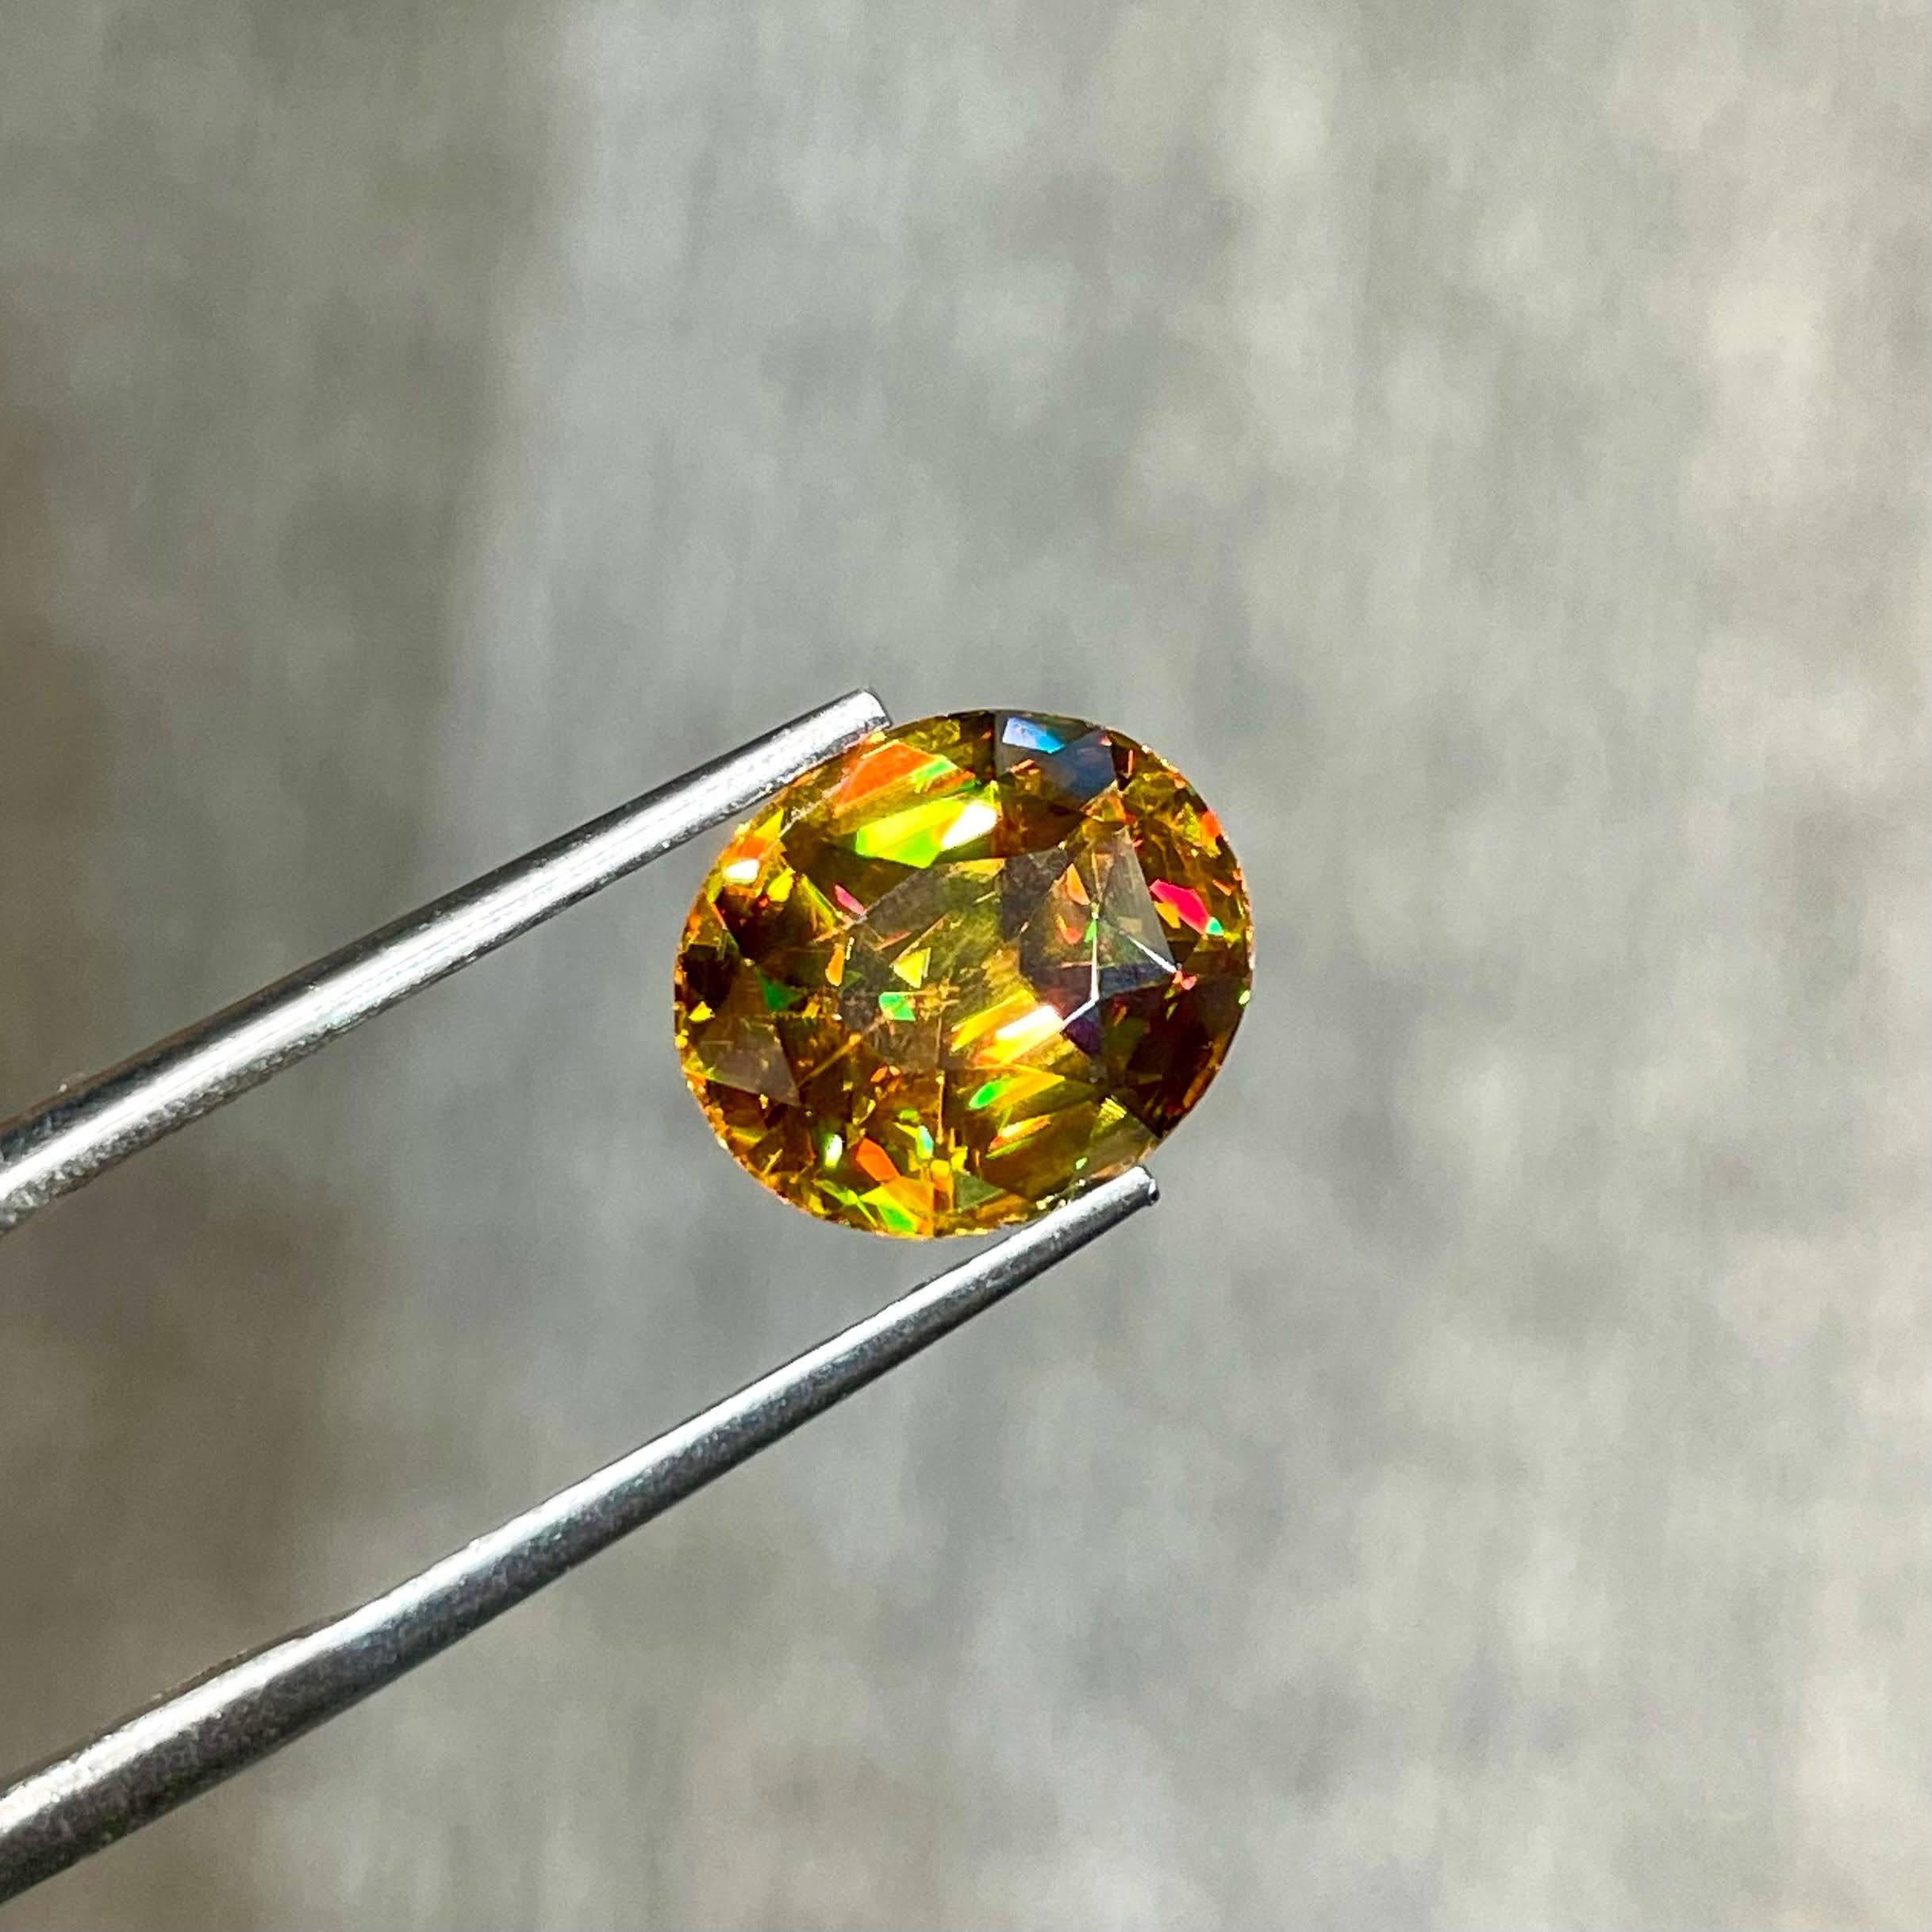 Weight 4.75 carats 
Dimensions 10.9x9.3x6.5 mm
Treatment none 
Origin Madagascar 
Clarity VVS/Better
Shape oval 
Cut Fancy Oval 





The exquisite beauty of a 4.75-carat Sphene stone unfolds in this fine example of a gem from Madagascar. Exhibiting